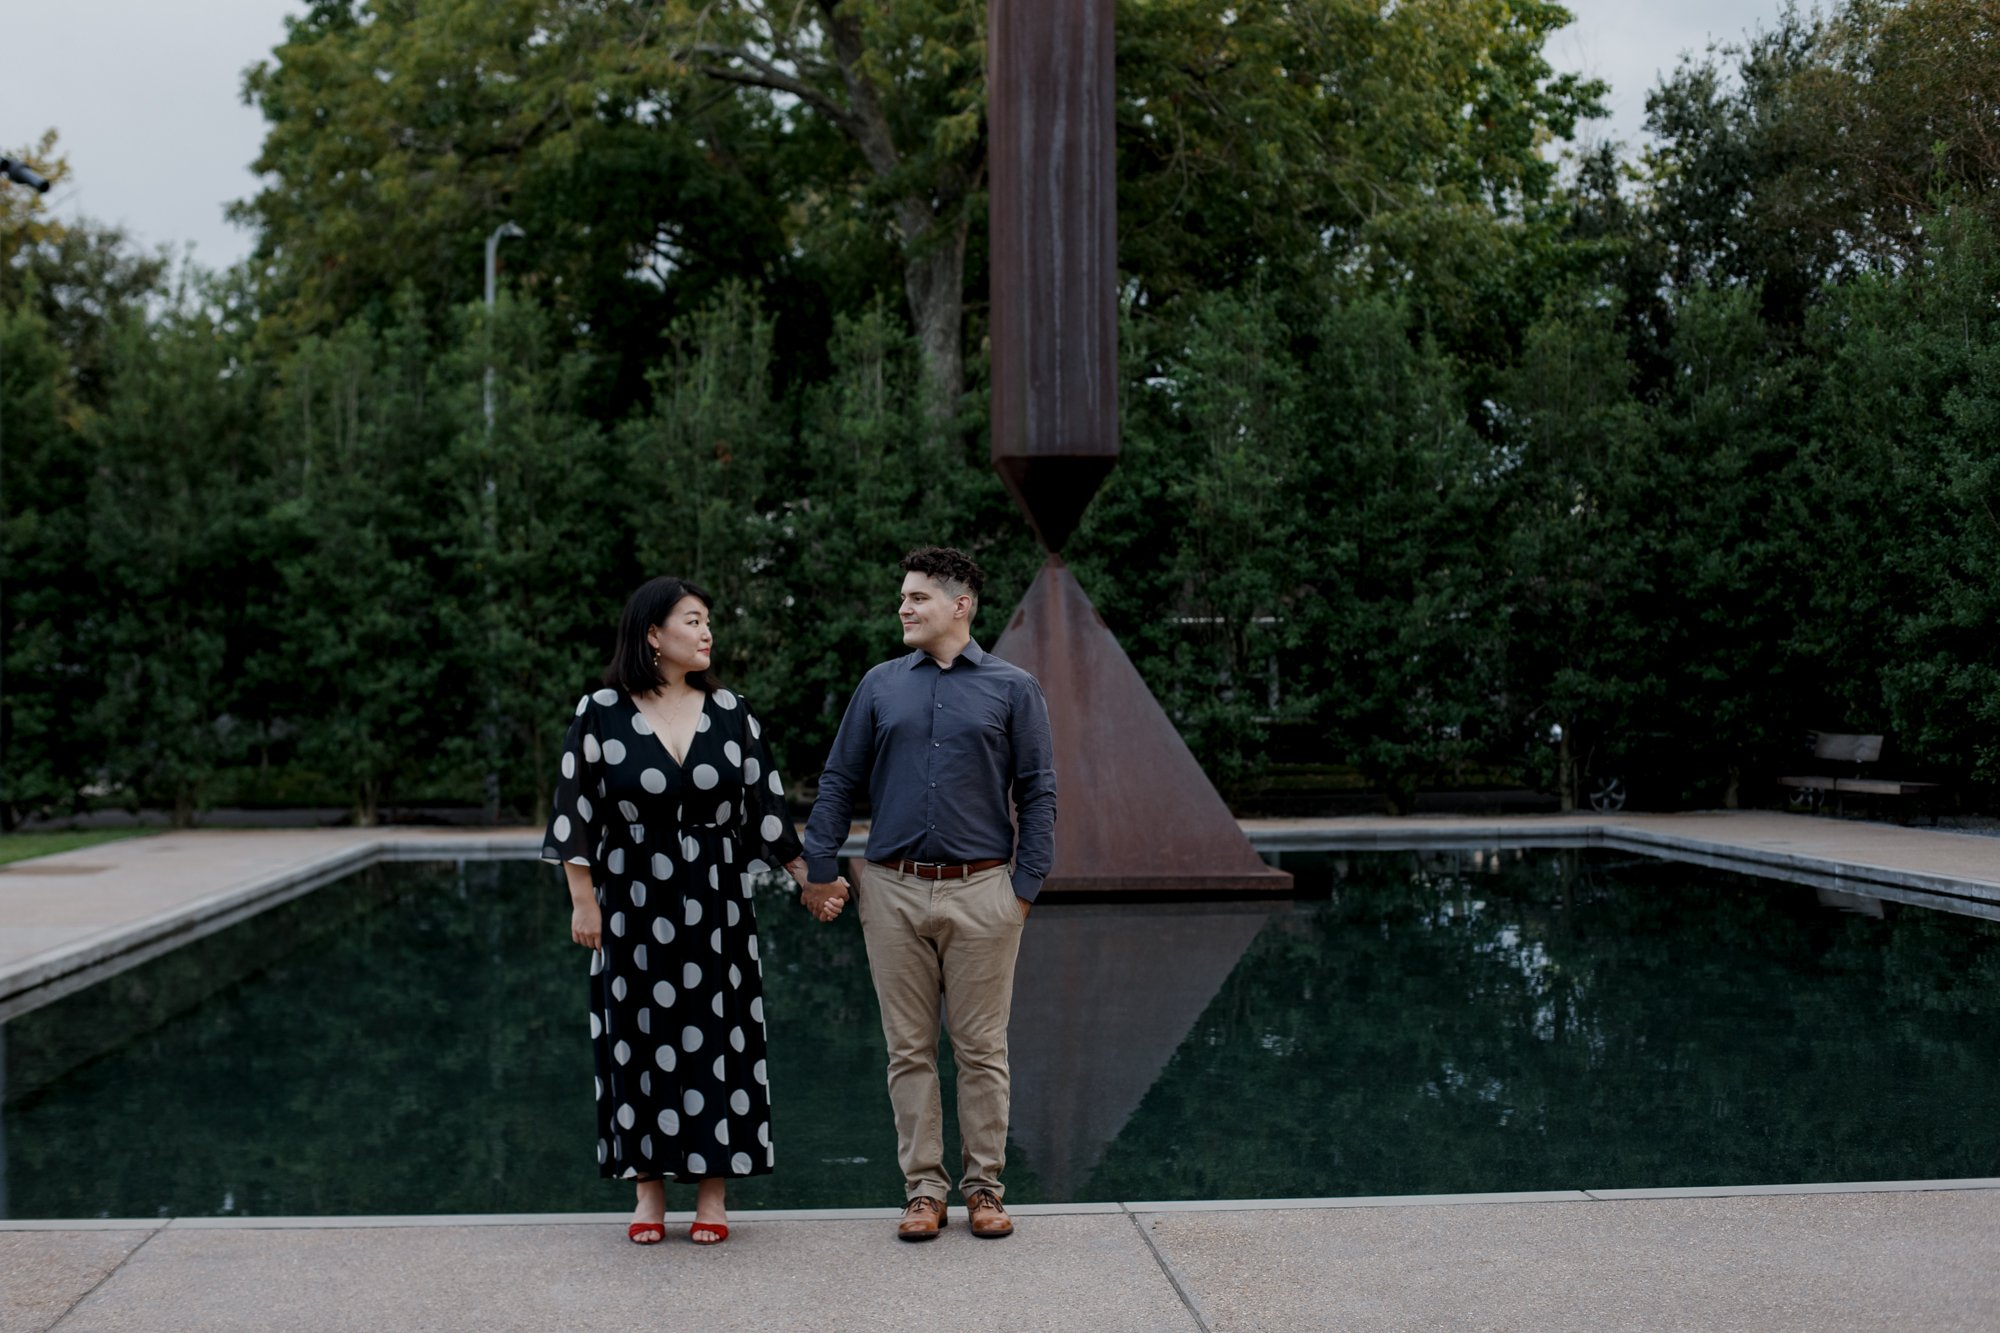 Couple posing hand in hand - Stylish Polka Dot Dress Engagement Photo Session by Rothko Chapel Sculpture